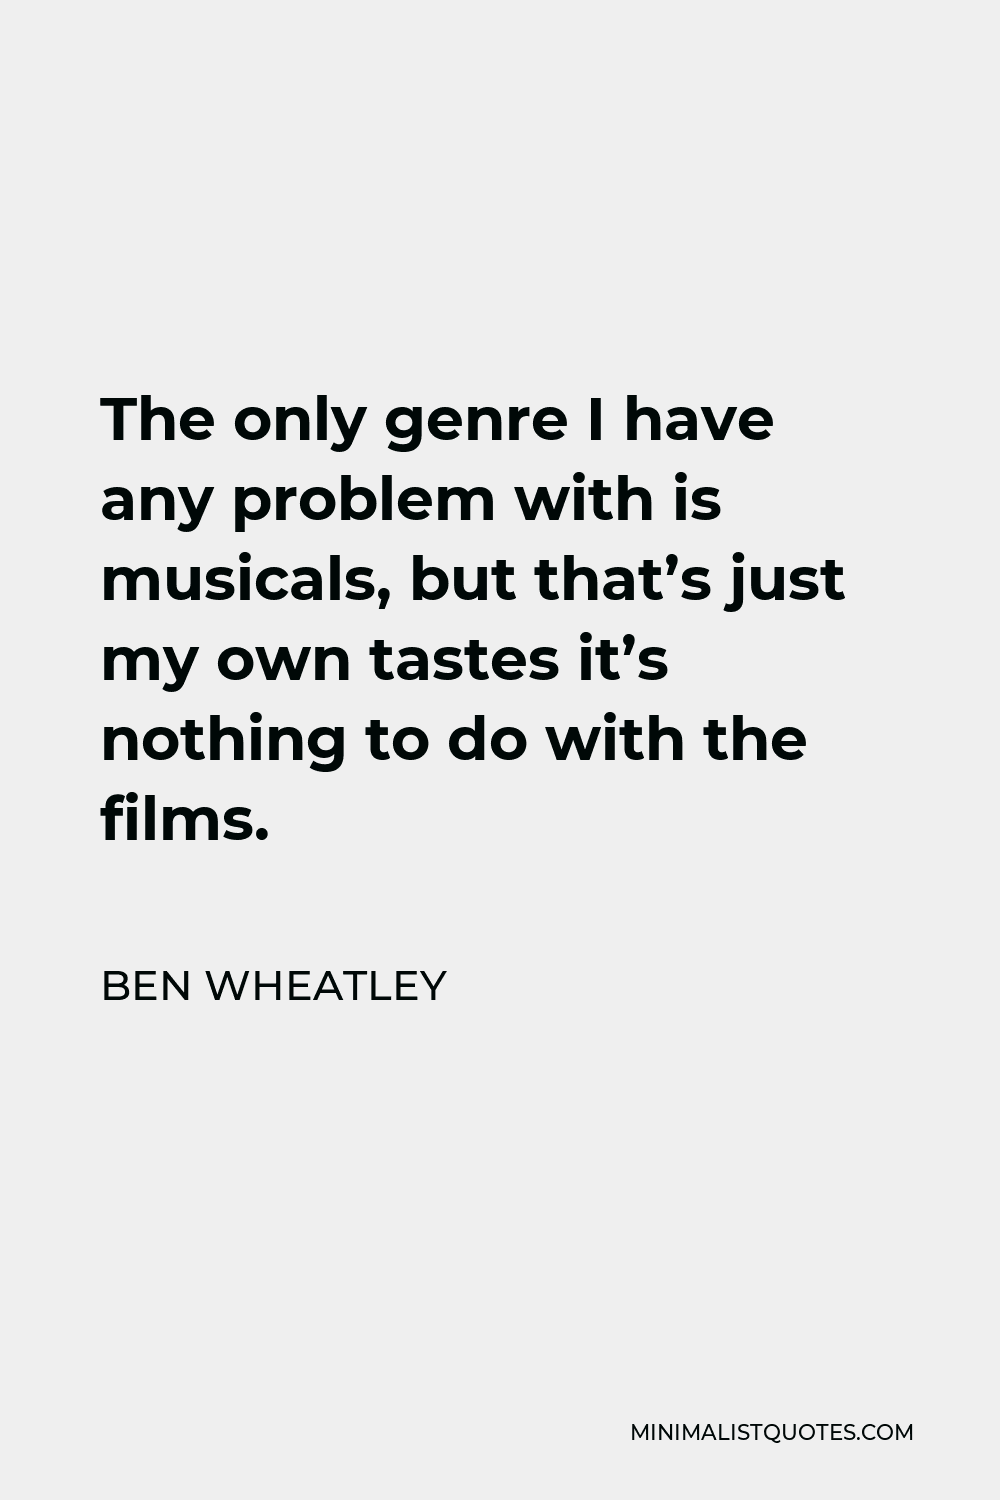 Ben Wheatley Quote - The only genre I have any problem with is musicals, but that’s just my own tastes it’s nothing to do with the films.